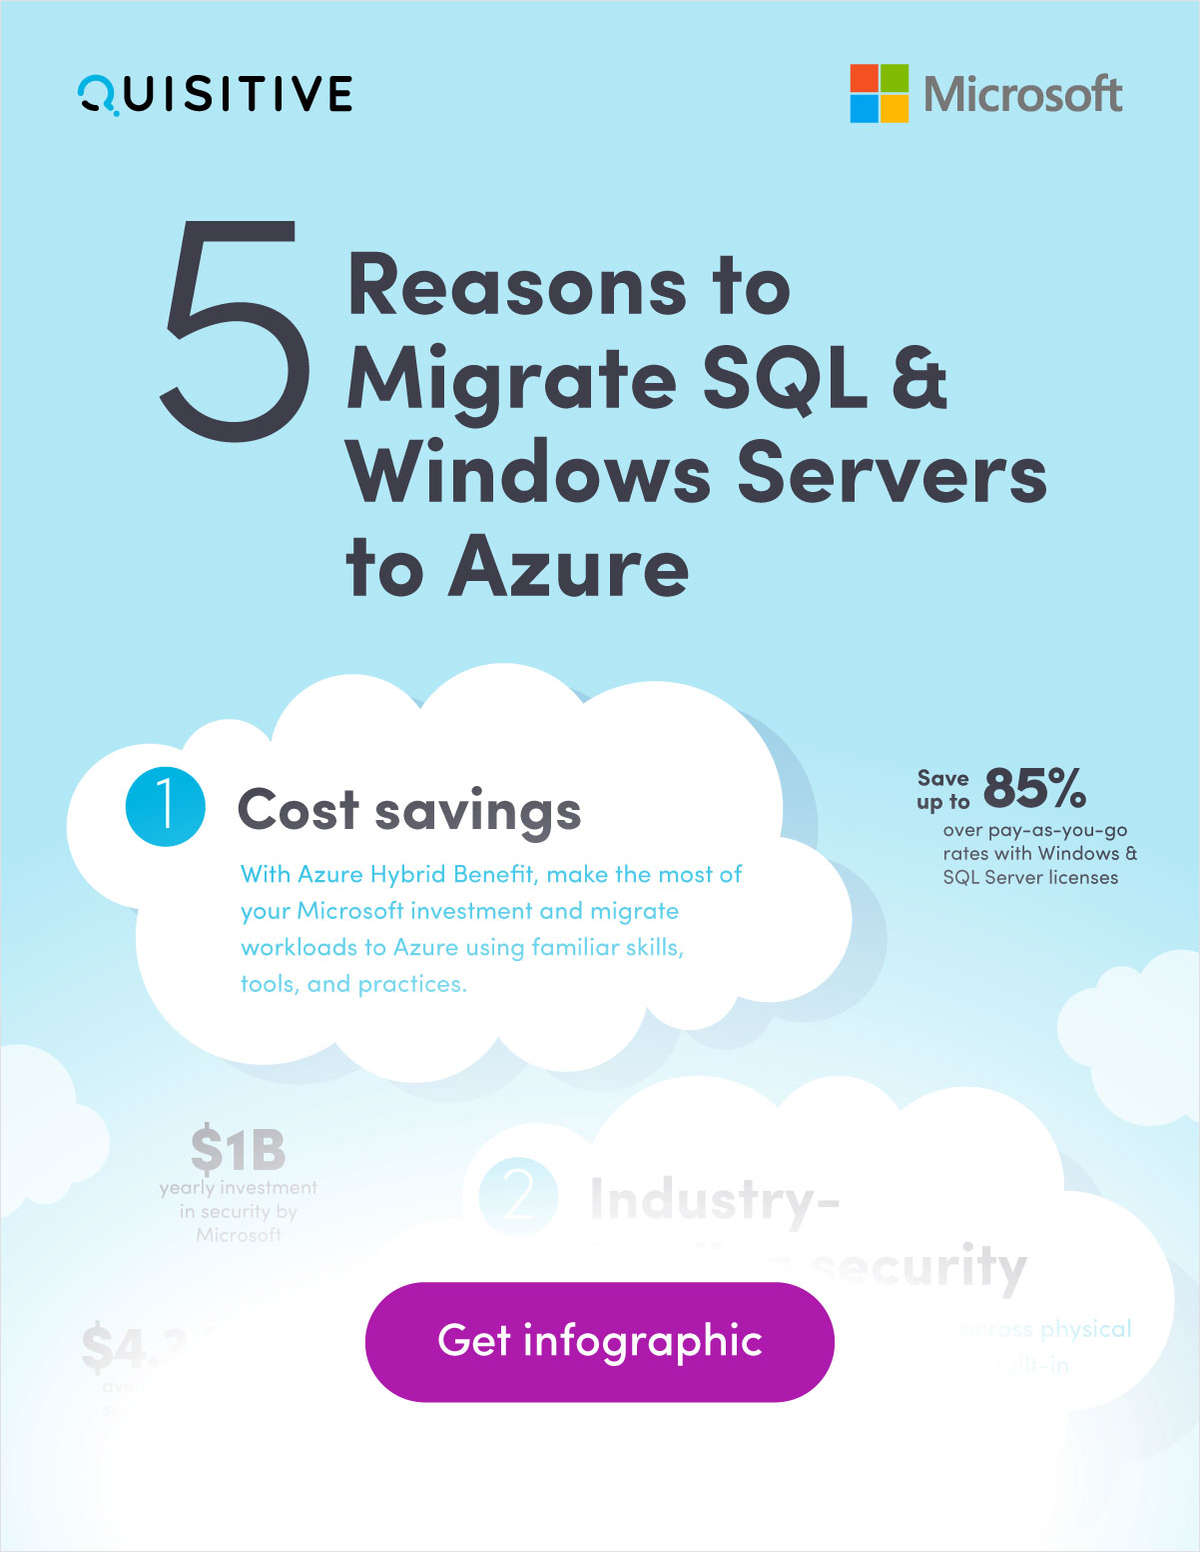 5 Reasons to Migrate SQL & Windows Servers to Azure